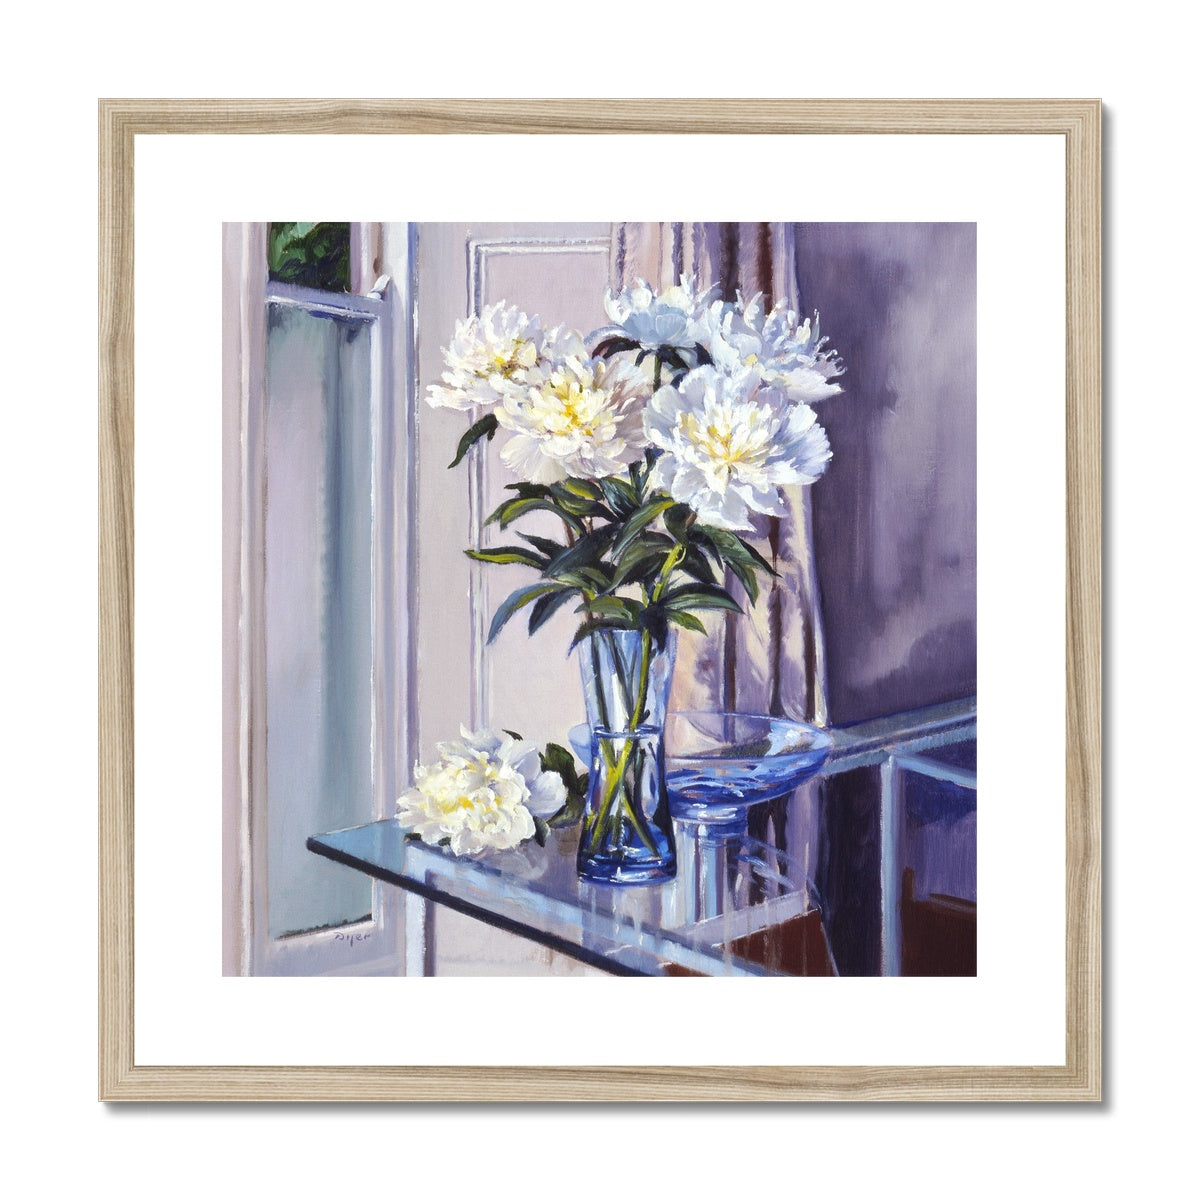 Ted Dyer Framed Open Edition Cornish Fine Art Print. &#39;White Peonies in a Blue Vase&#39;. Cornwall Art Gallery